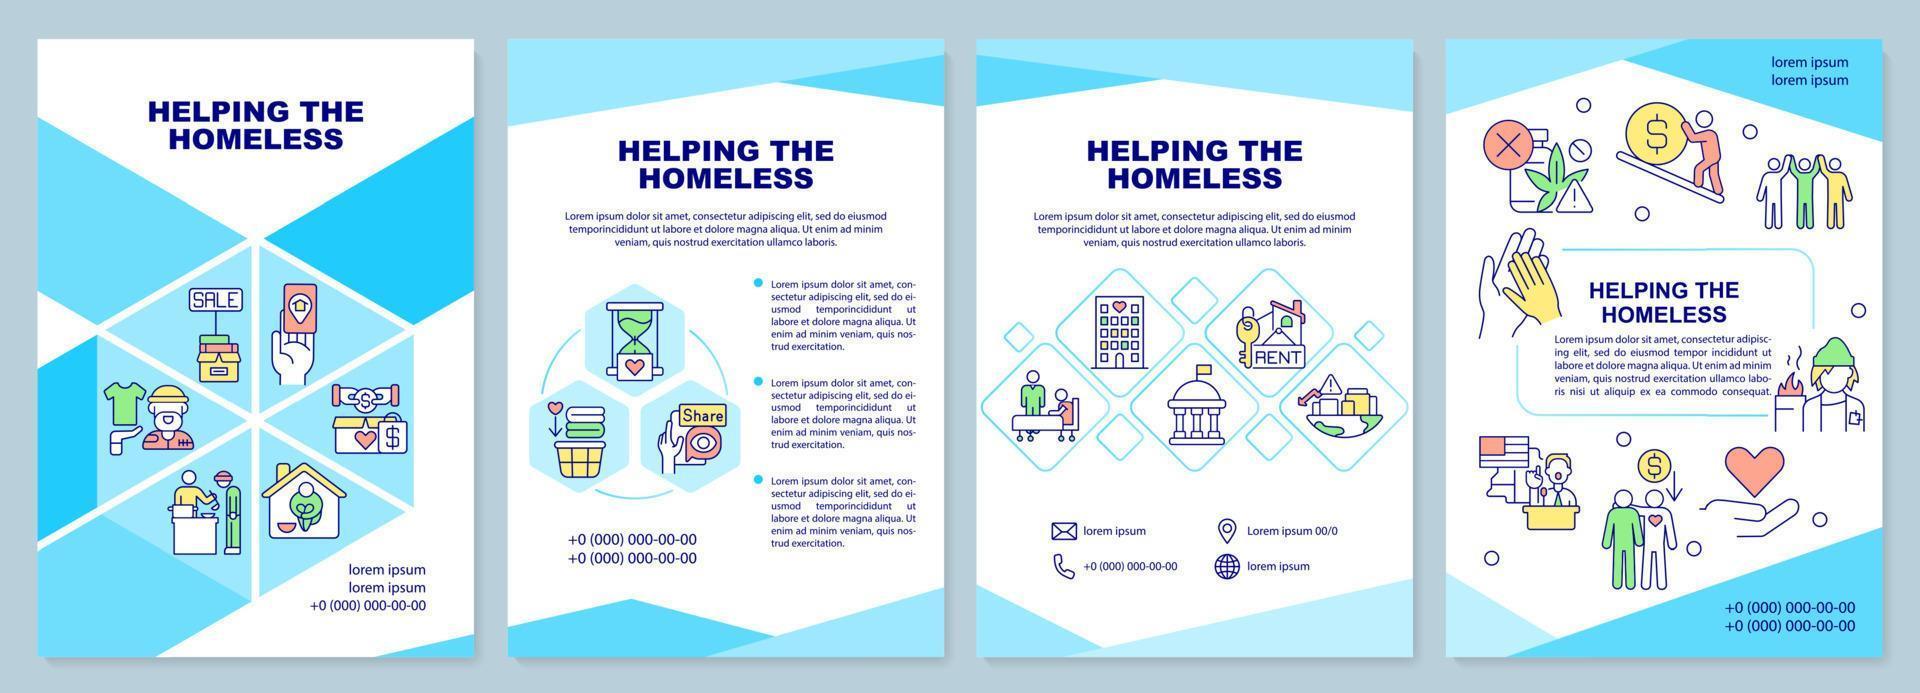 Helping homeless people turquoise brochure template. Supportive program. Leaflet design with linear icons. 4 vector layouts for presentation, annual reports.